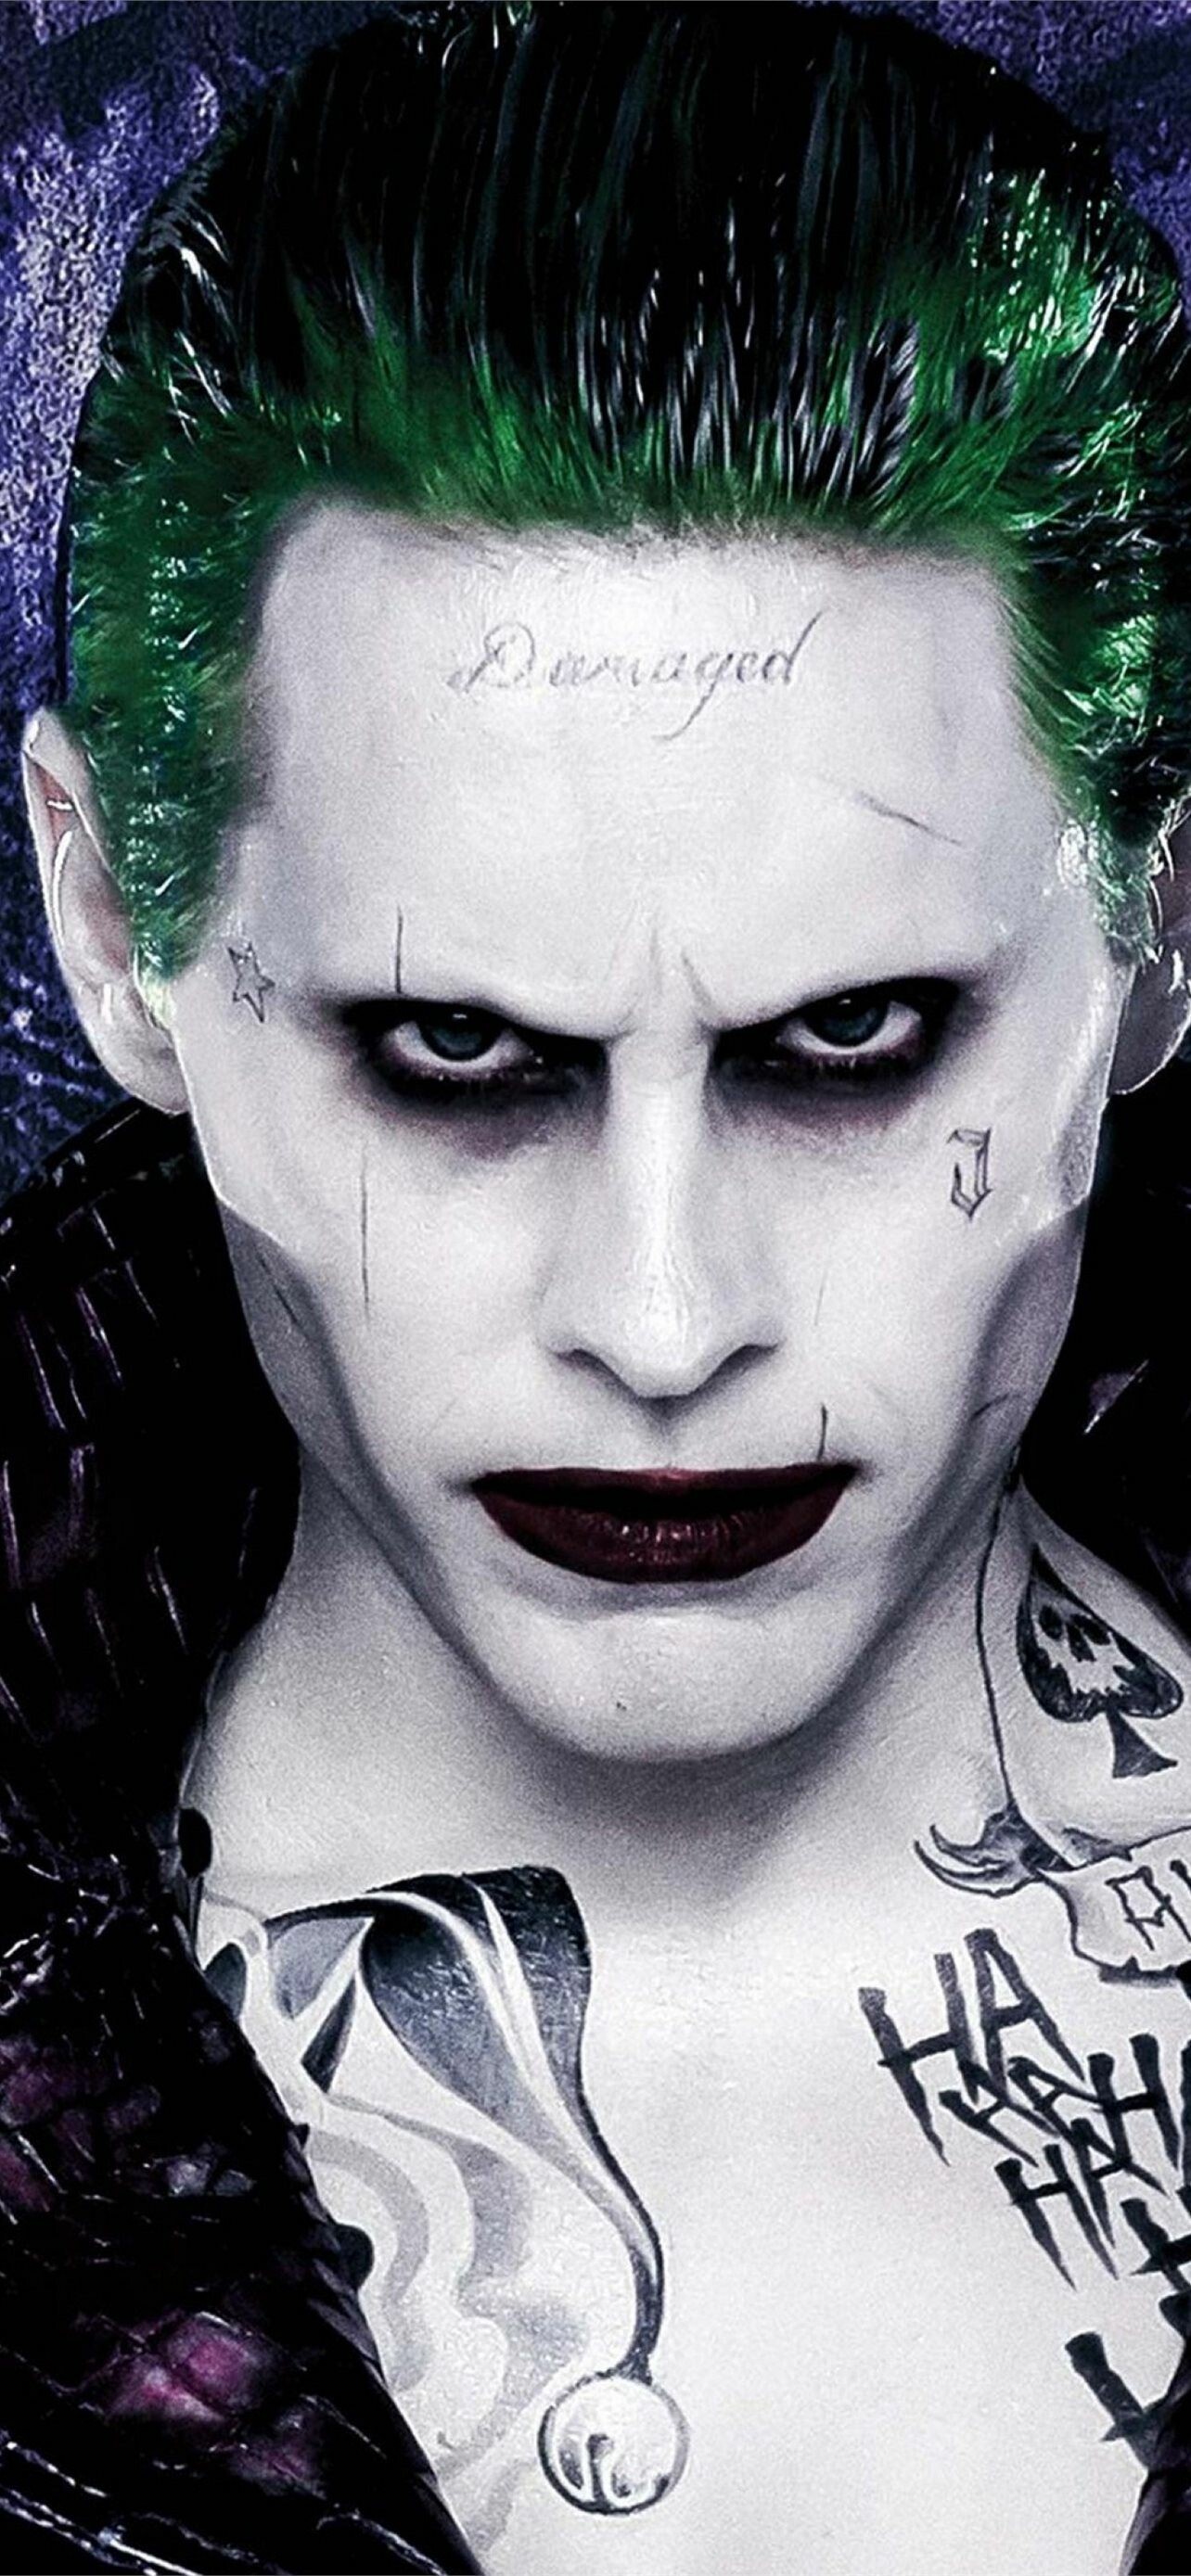 Suicide Squad: Academy Award-winning actor Jared Leto was cast to portray the Joker in the 2016 film directed by David Ayer. 1290x2780 HD Wallpaper.